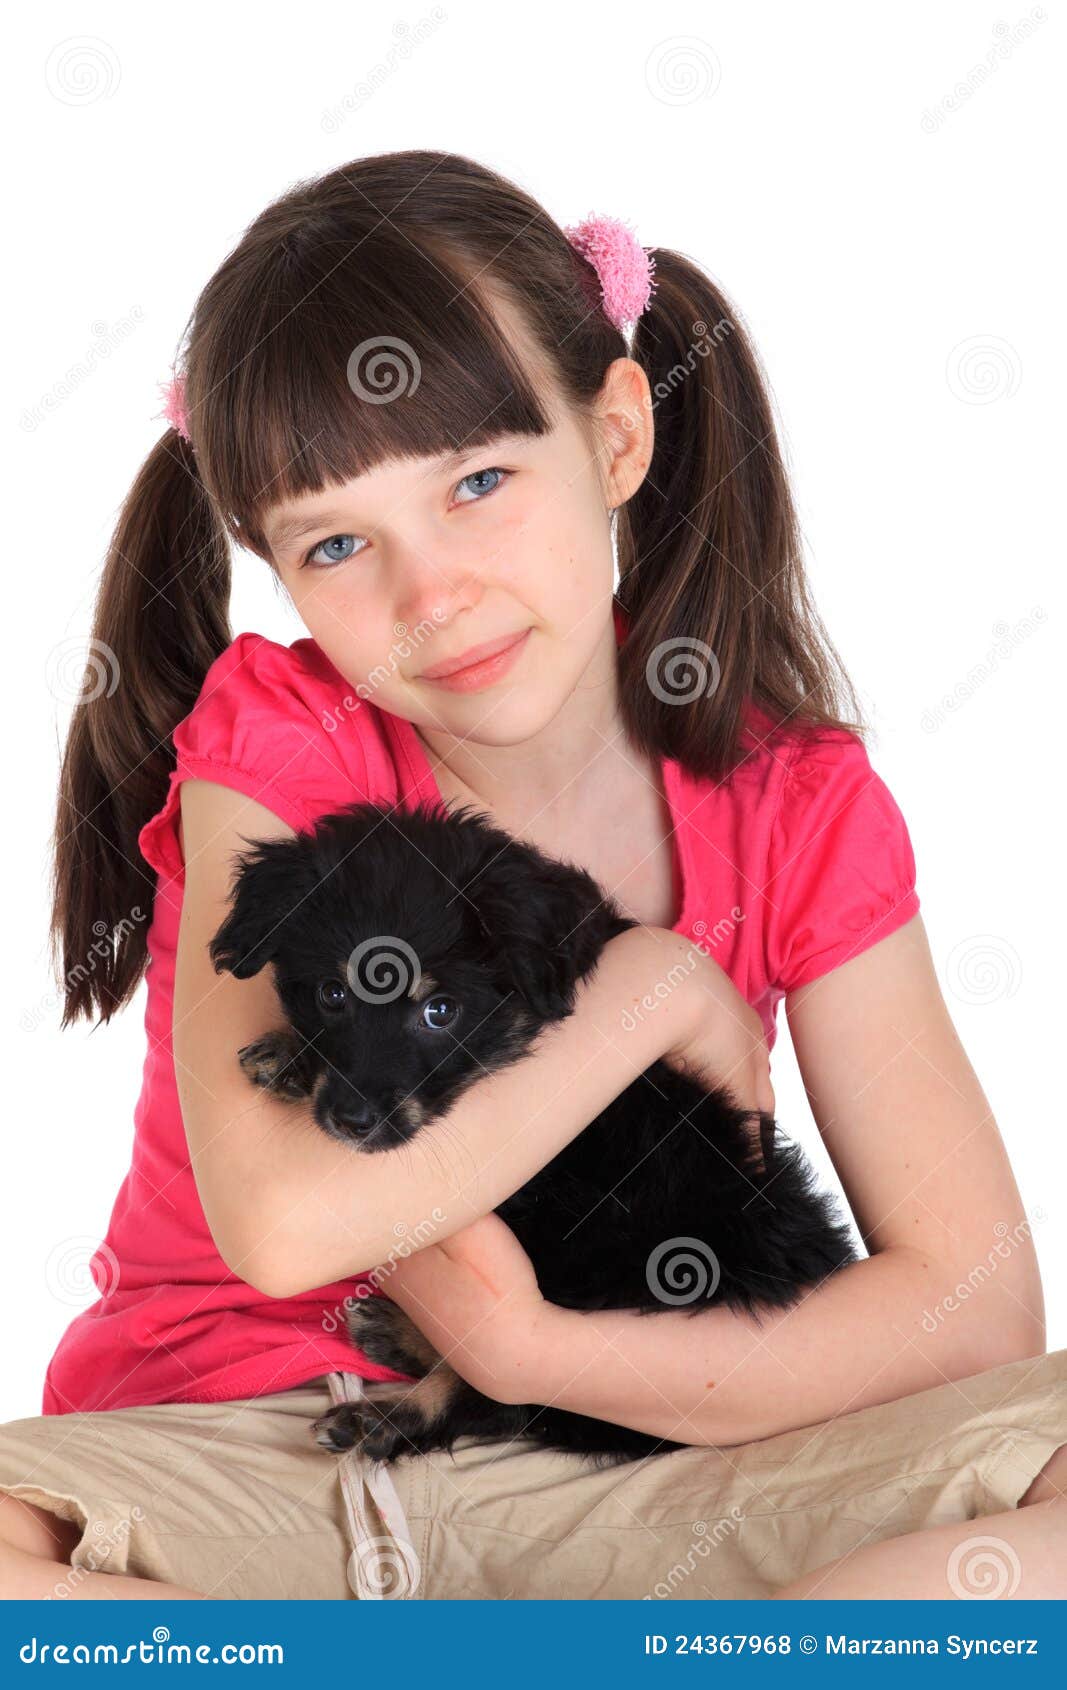 Cute girl with pet dog stock photo. Image of hair, domesticated - 24367968